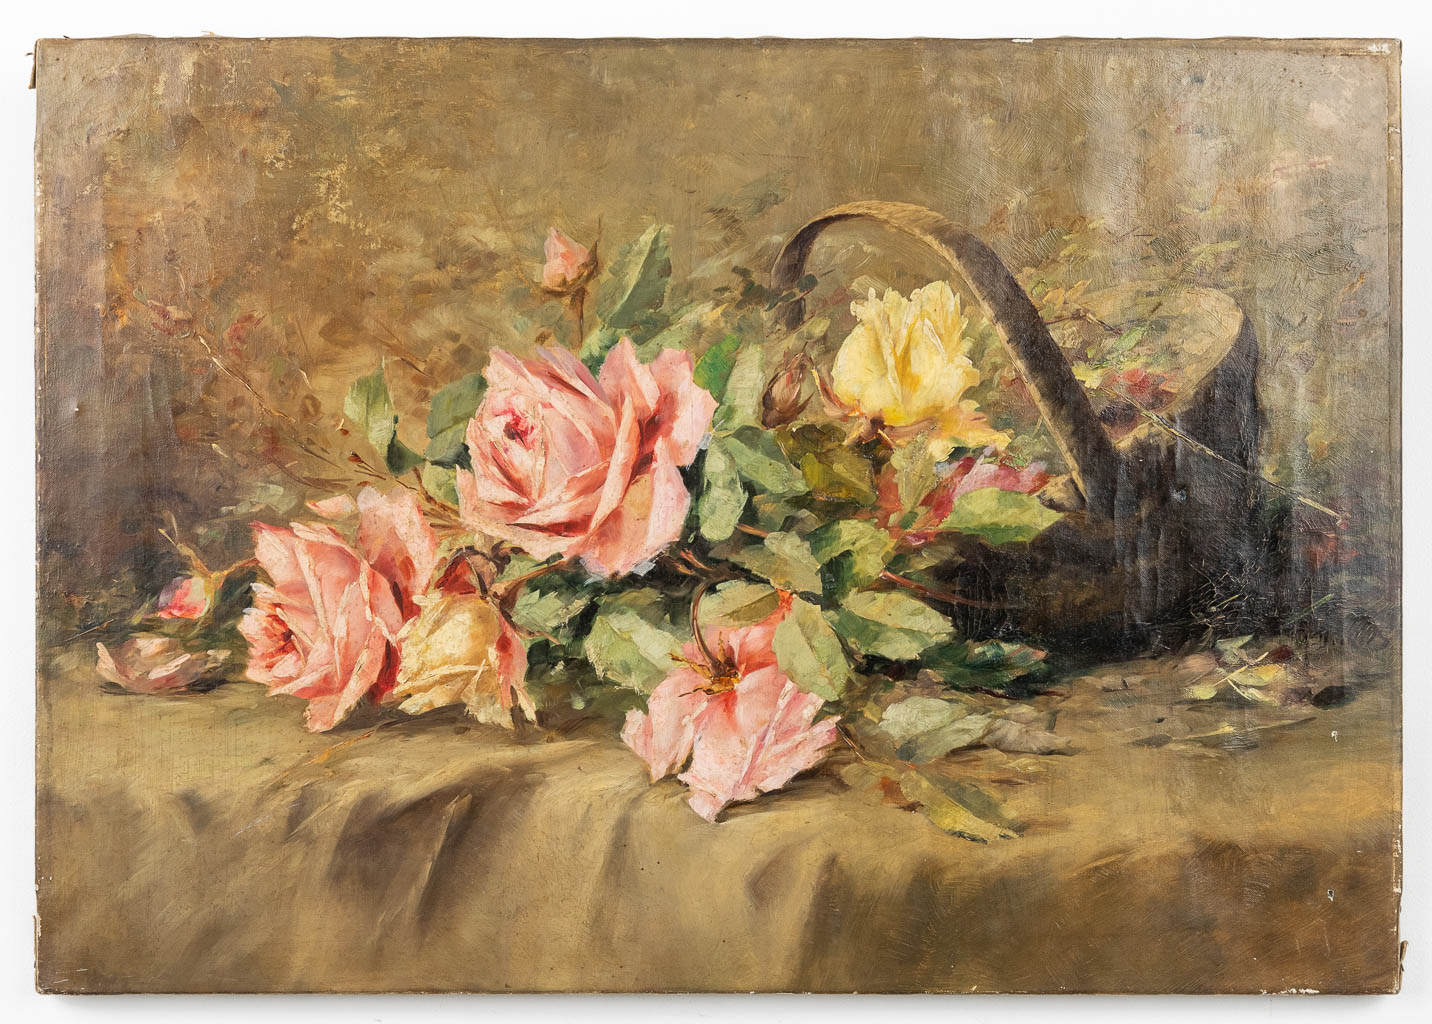 Jan DECKERS (1865-1942) 'Flowers' a painting, oil on canvas. (67 x 47,5 cm)